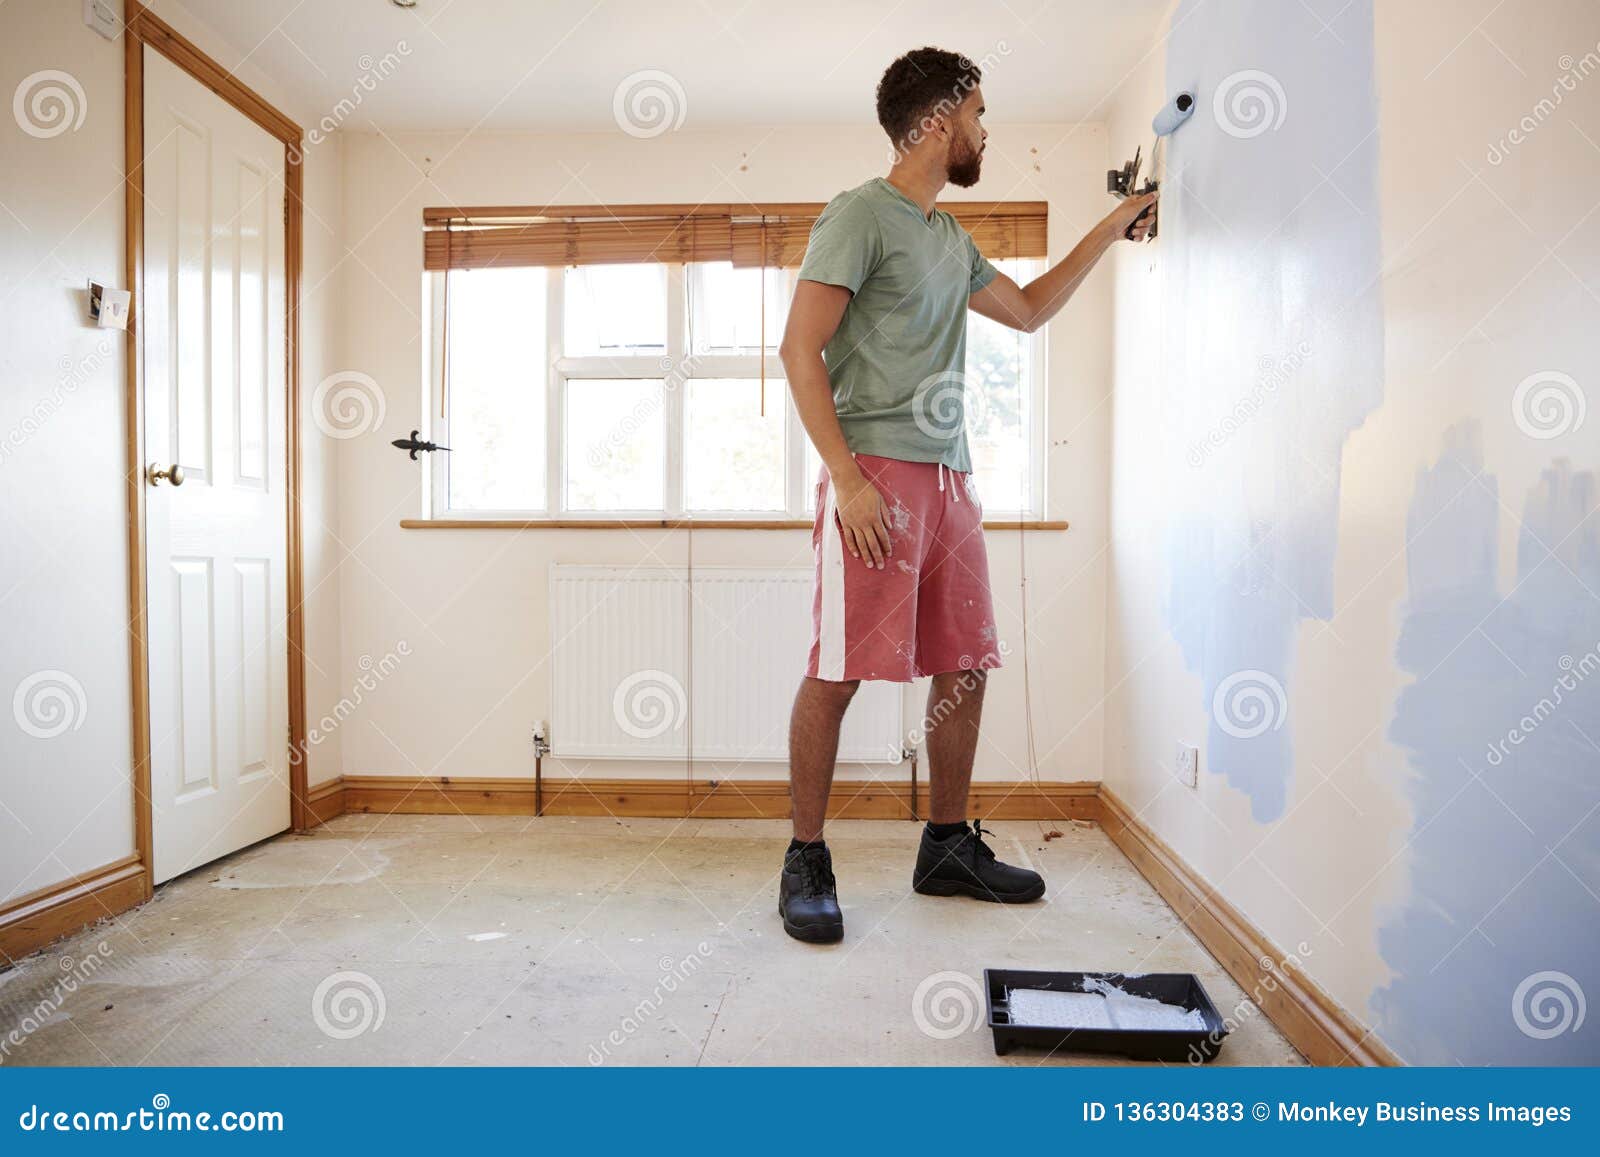 Man Decorating Room in New Home Painting Wall Stock Image - Image ...